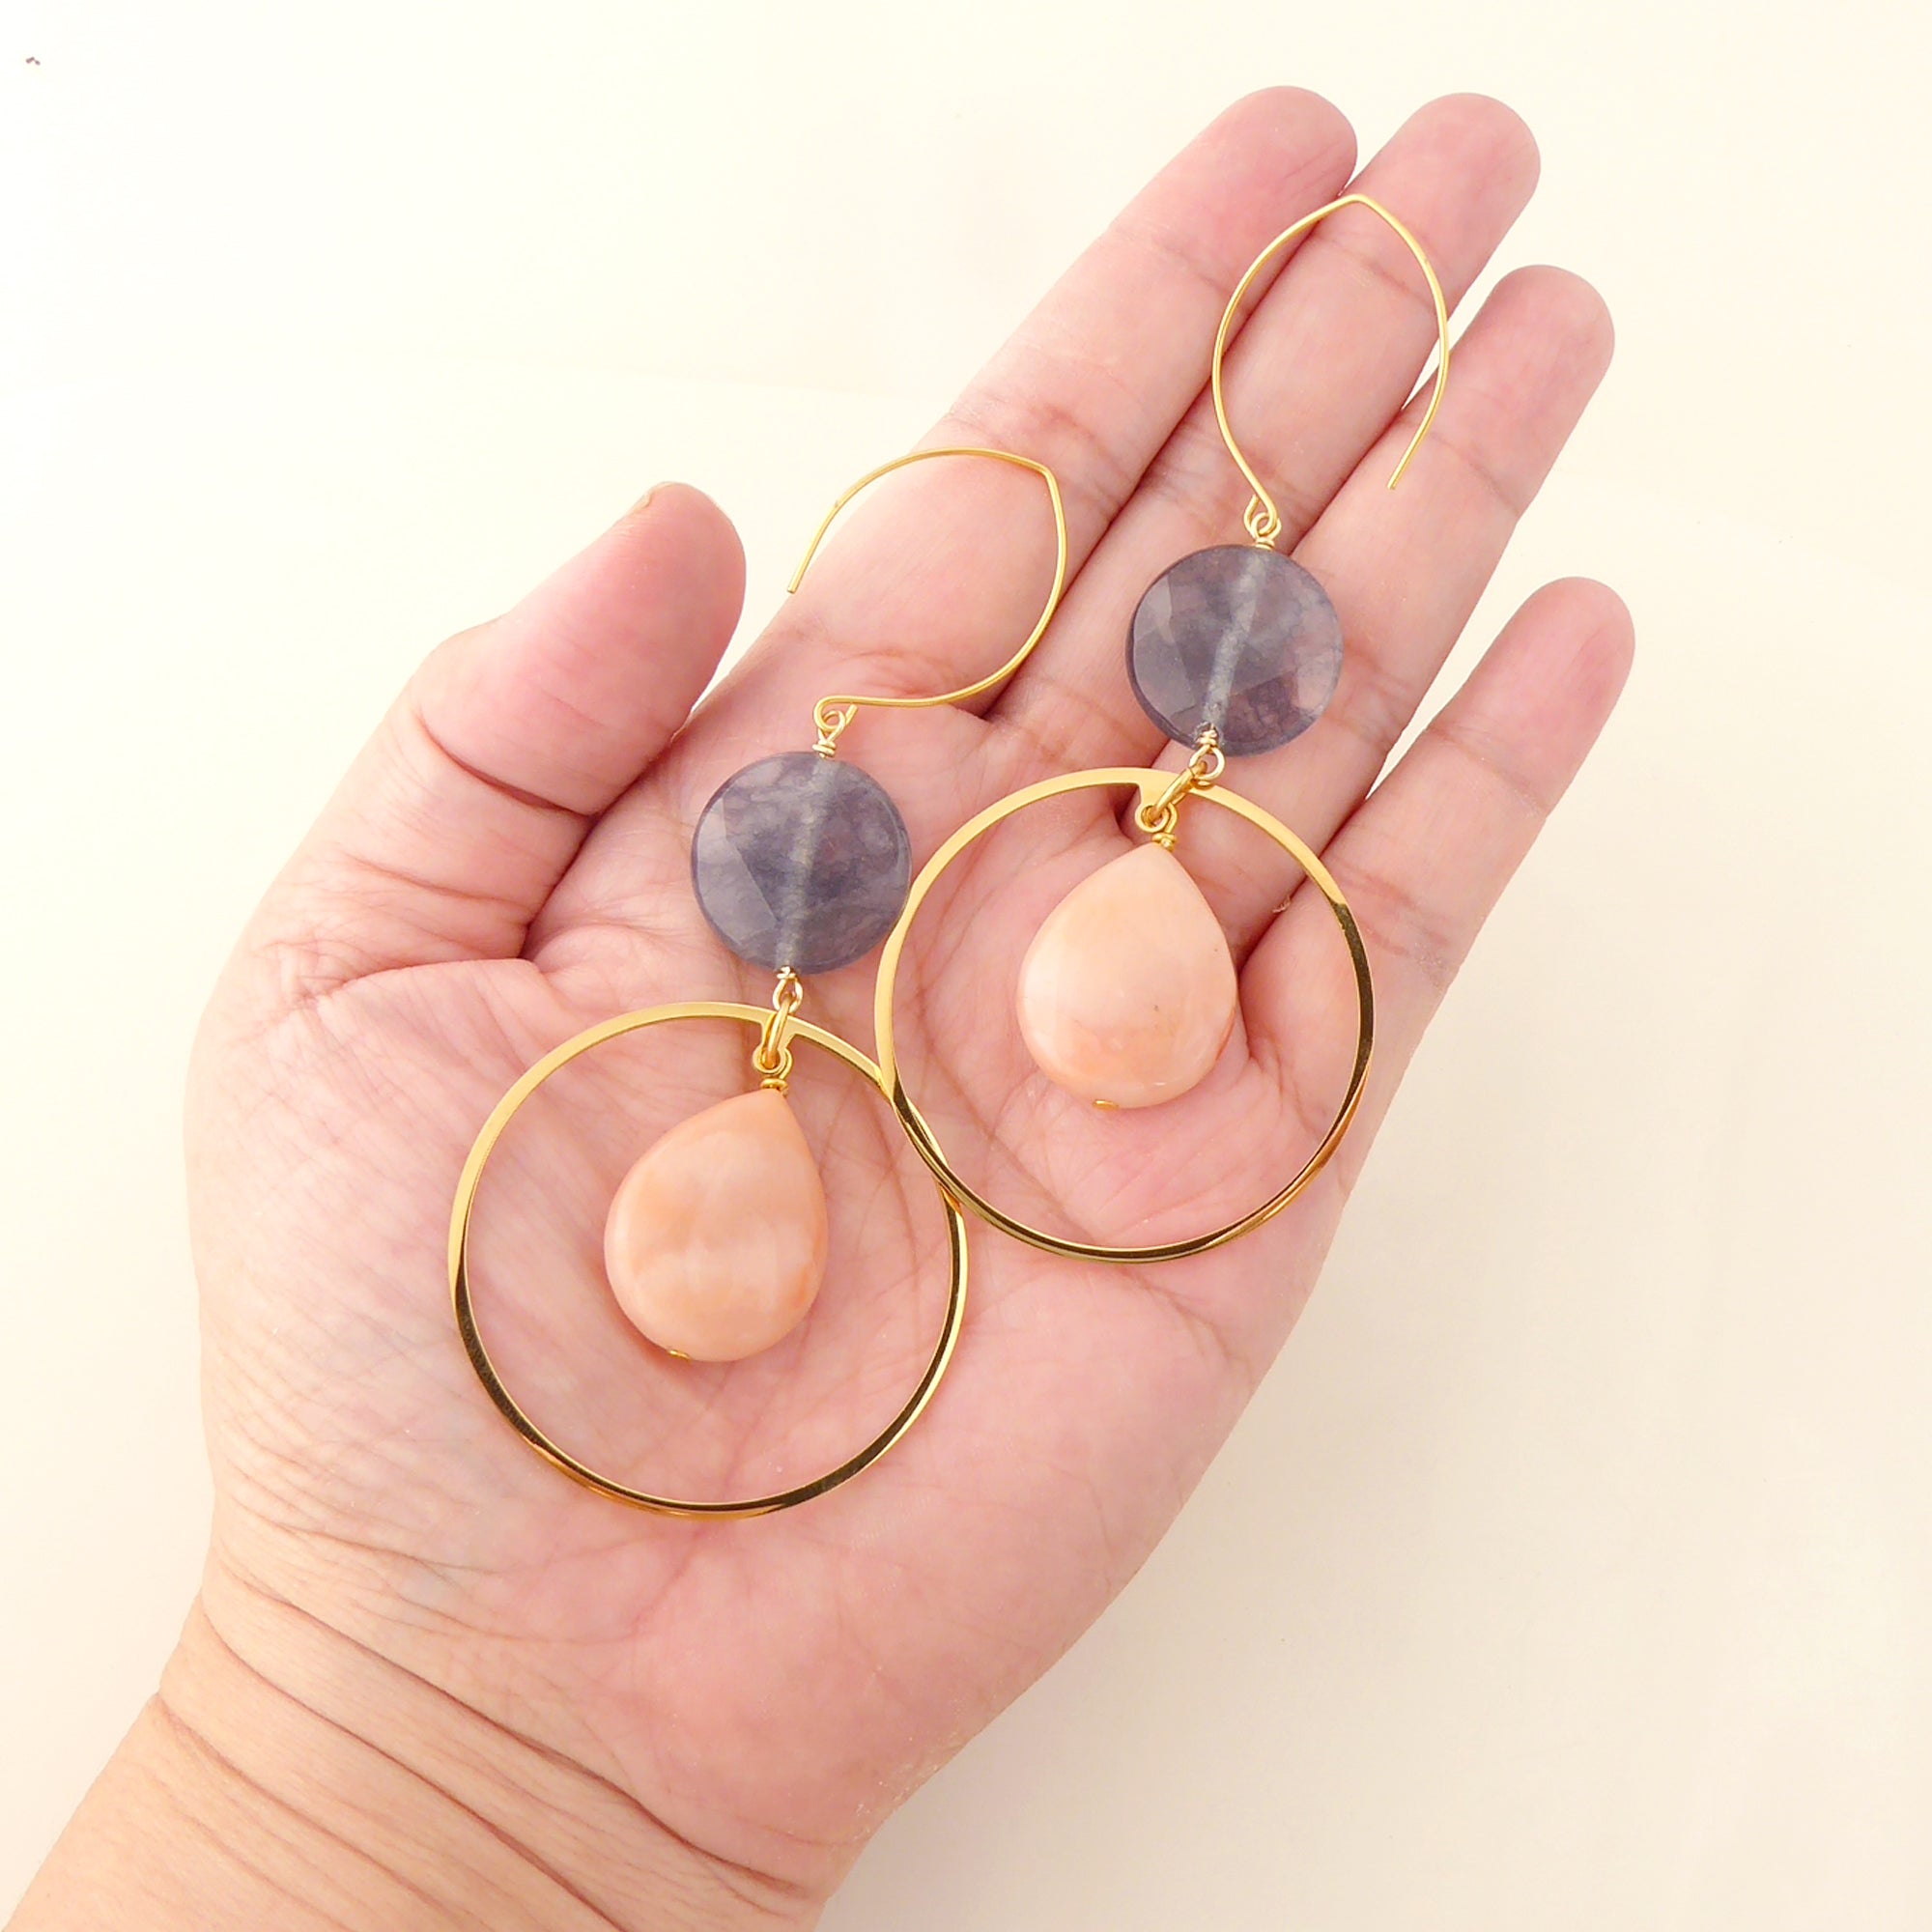 Peach aventurine and storm quartz earrings by Jenny Dayco 4